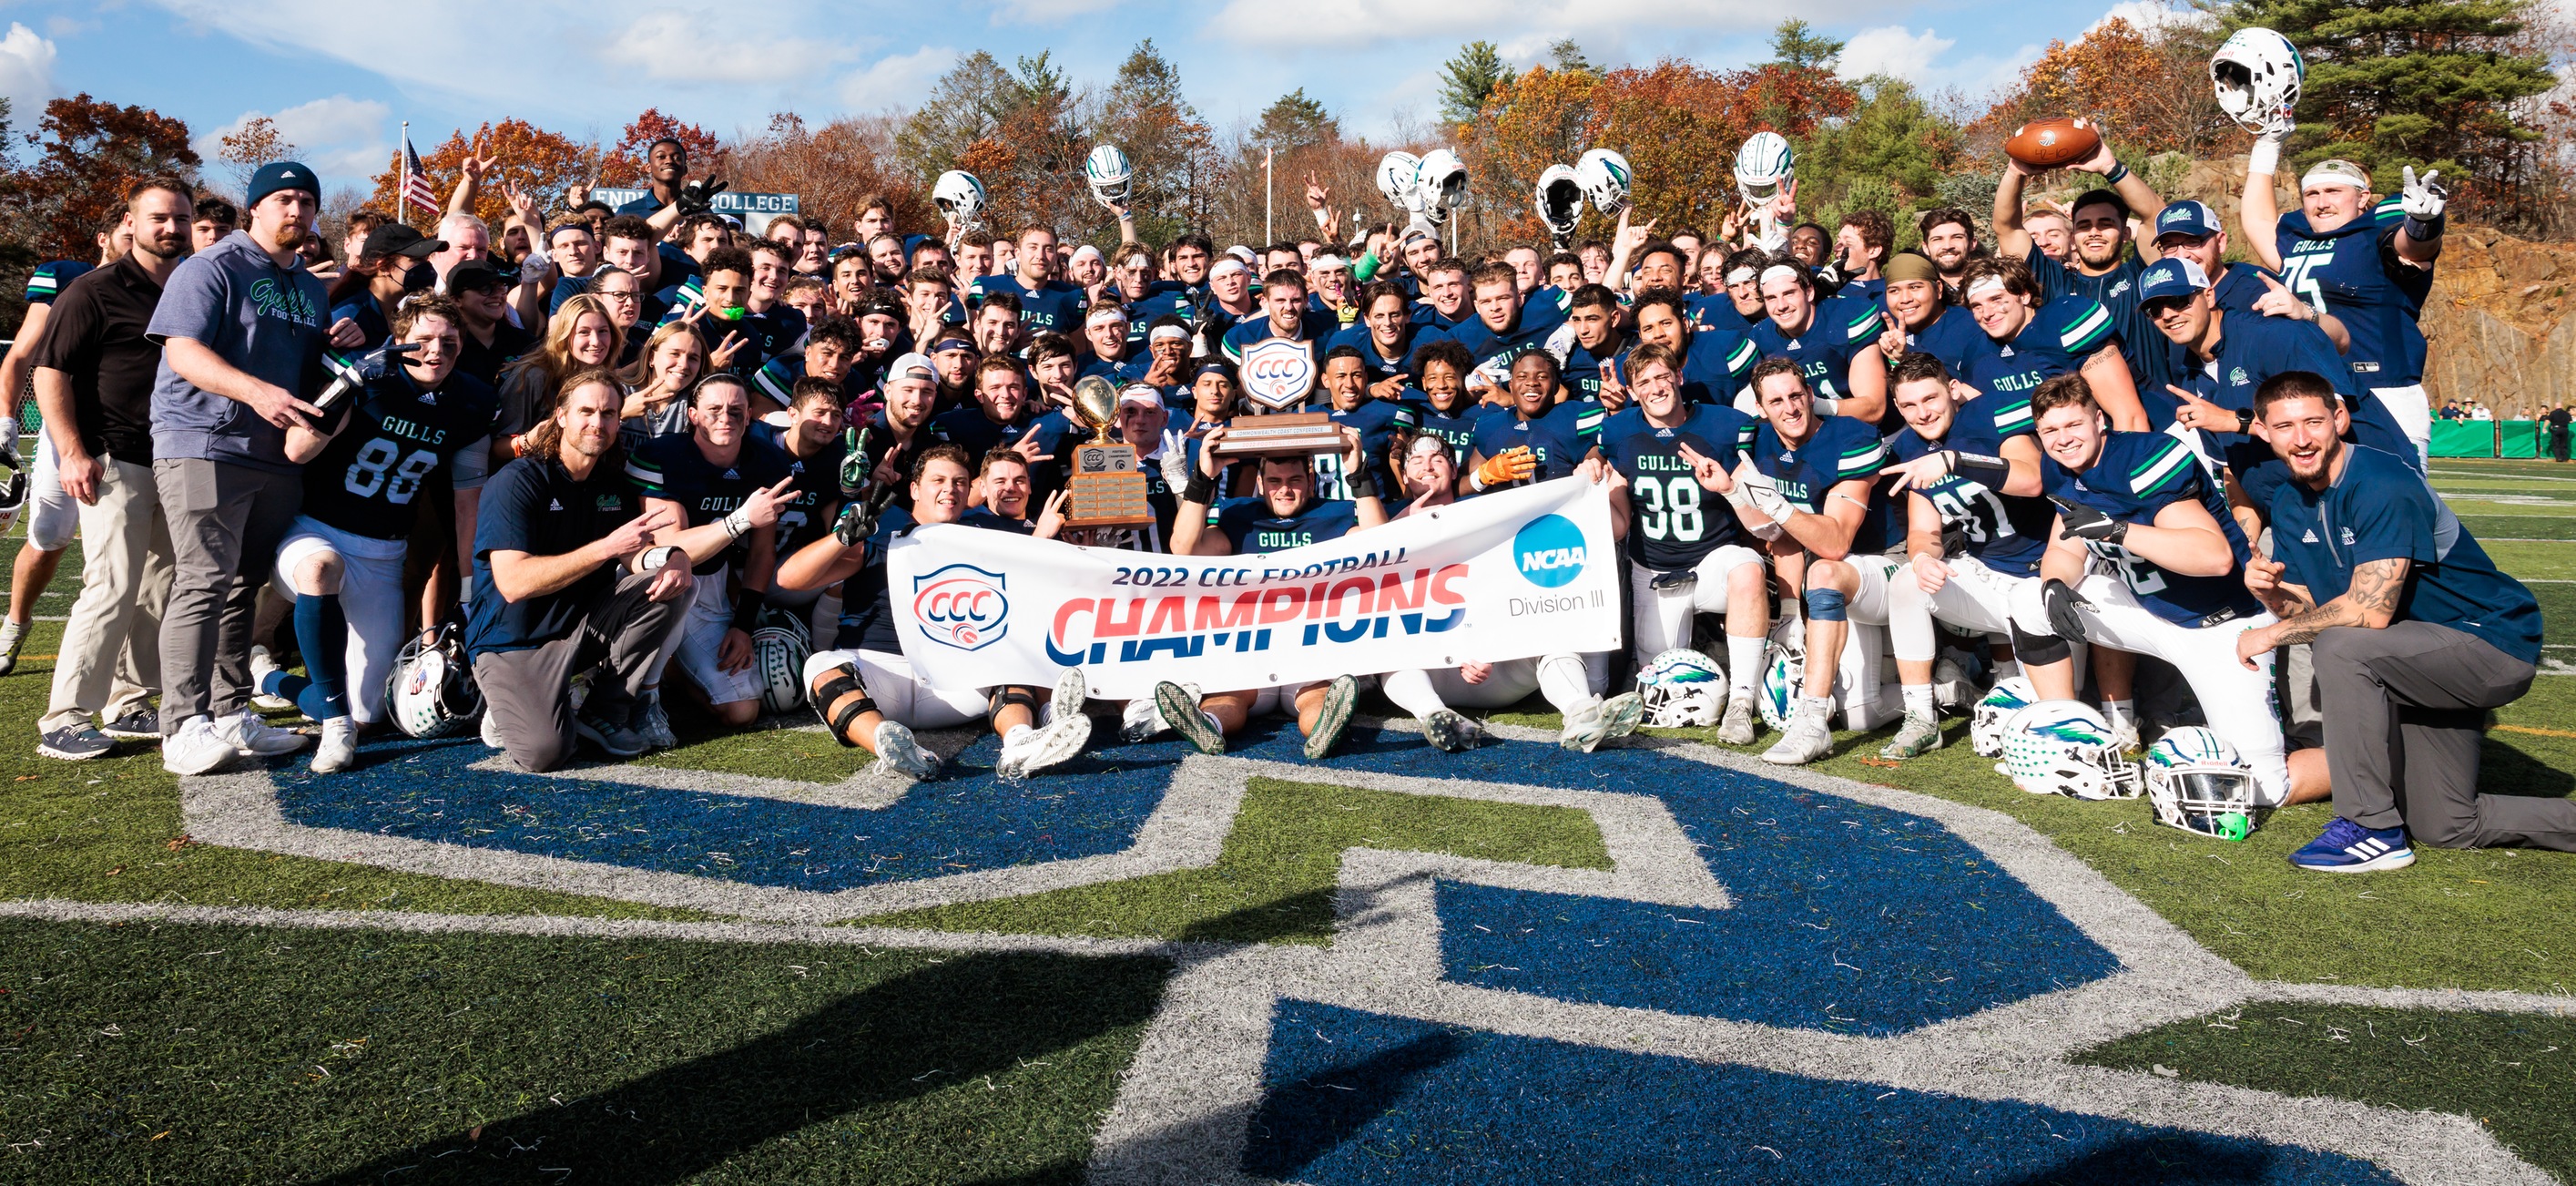 NCAA TOURNAMENT: No. 22/23 Endicott Hosts Springfield In First Round On Saturday (11/19)